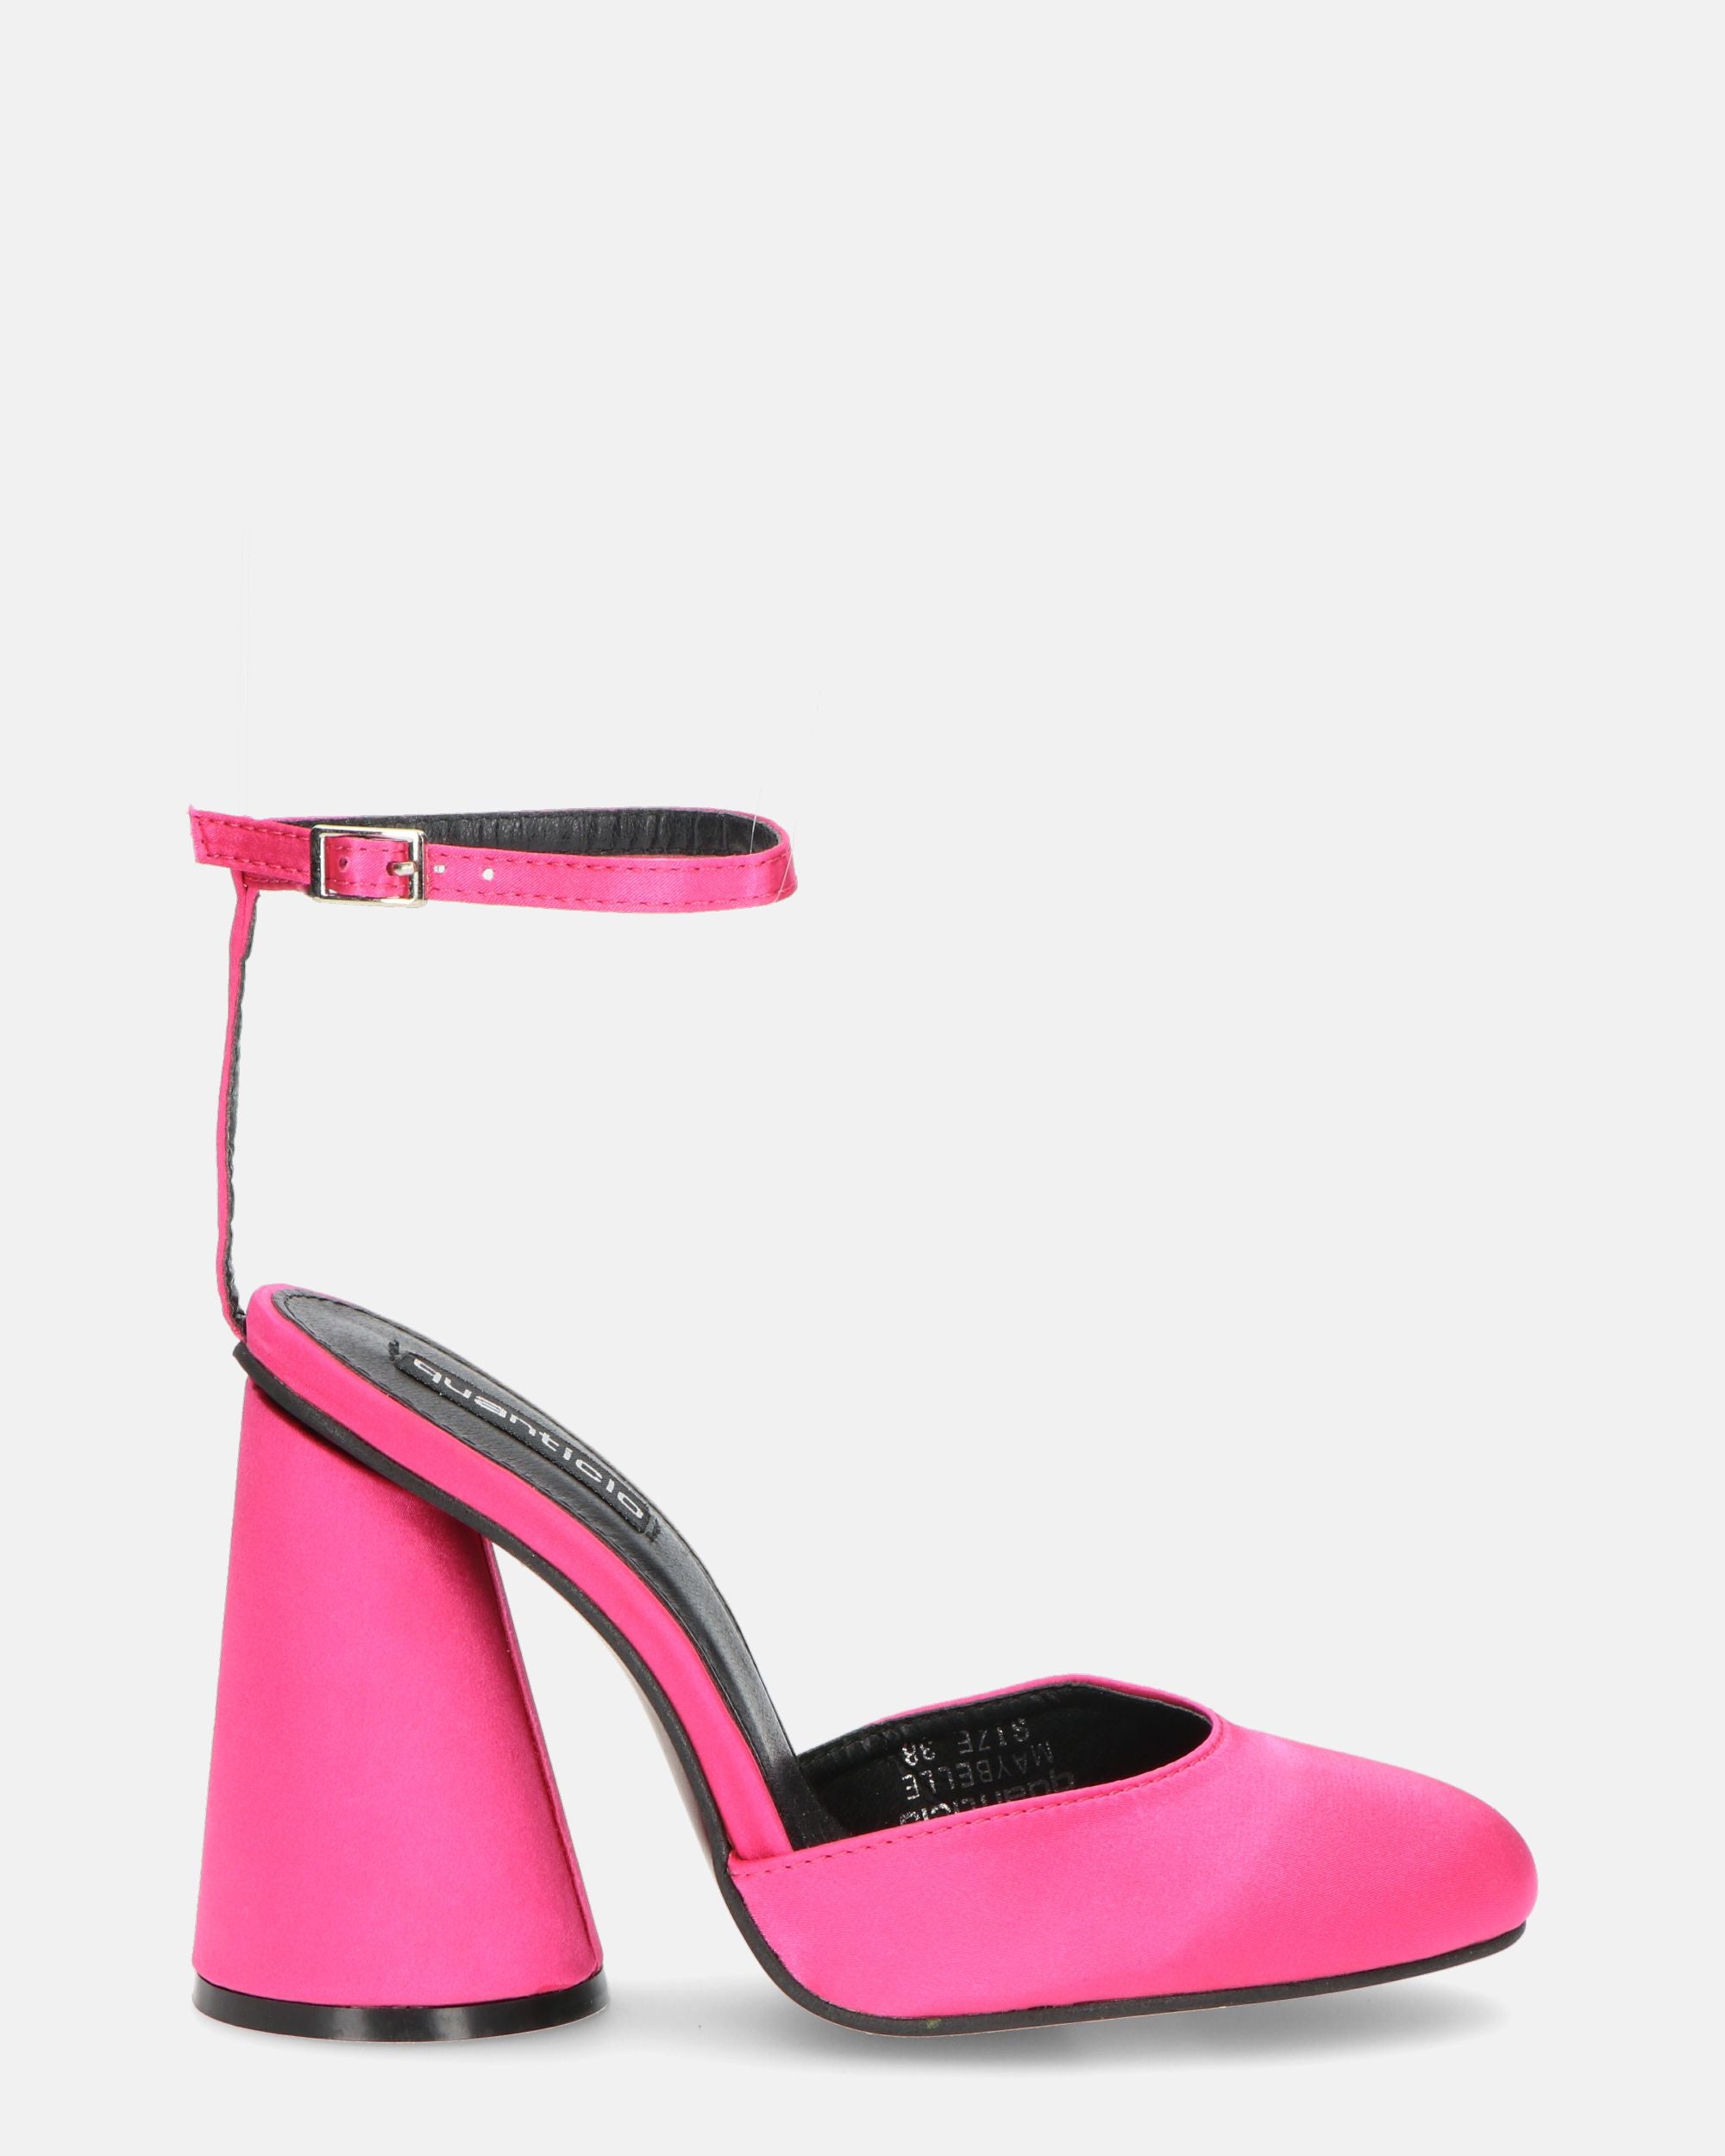 MAYBELLE - fuchsia lycra sandals with cylindrical heel